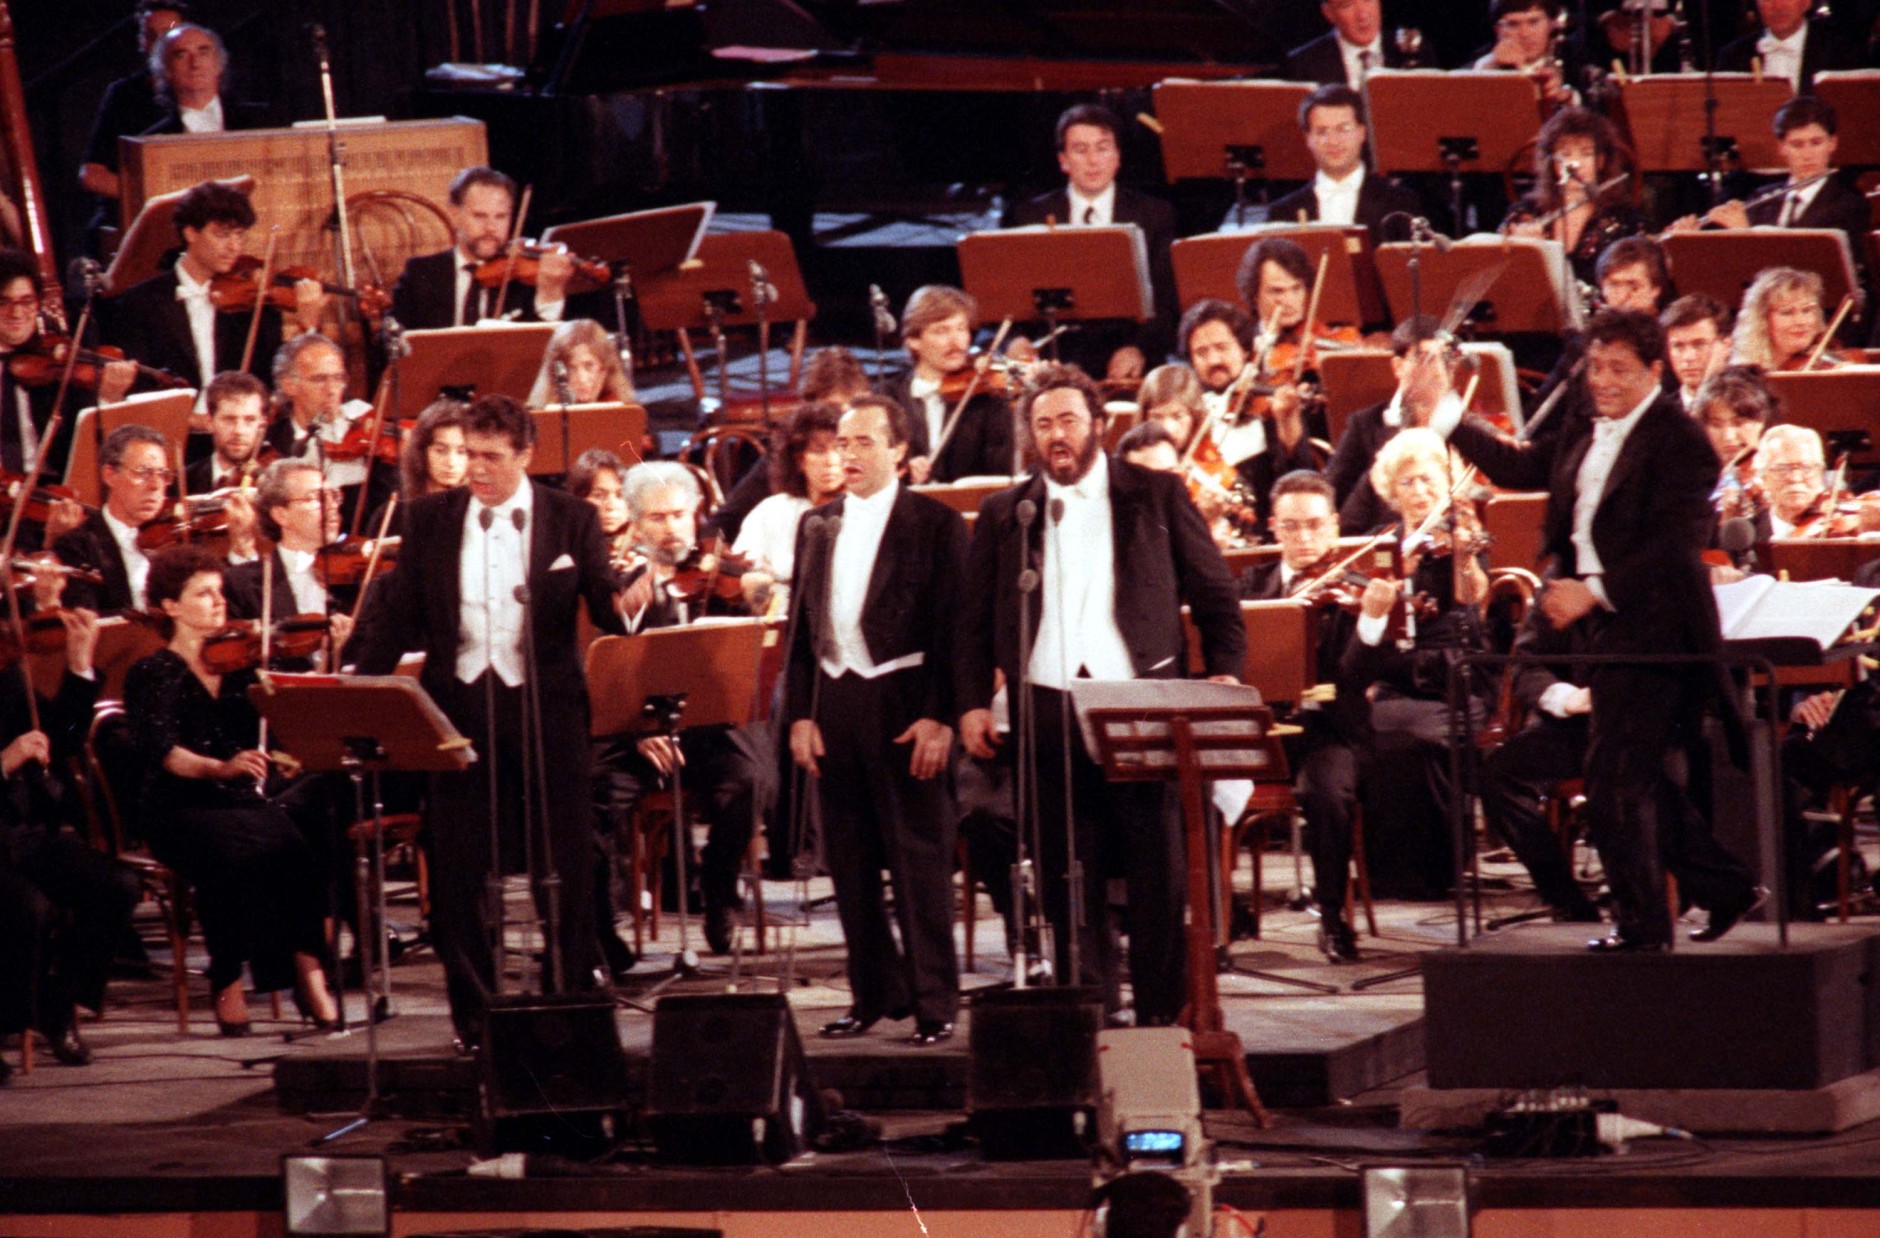 Luciano Pavarotti, Placido Domingo and Jose Carreras perform as the Three Tenors, at their first concert in the Roman Baths of Caracalla, Rome, Italy, July 7, 1990, during the 1990 World Cup. (AP Photo/Bruno Mosconi)